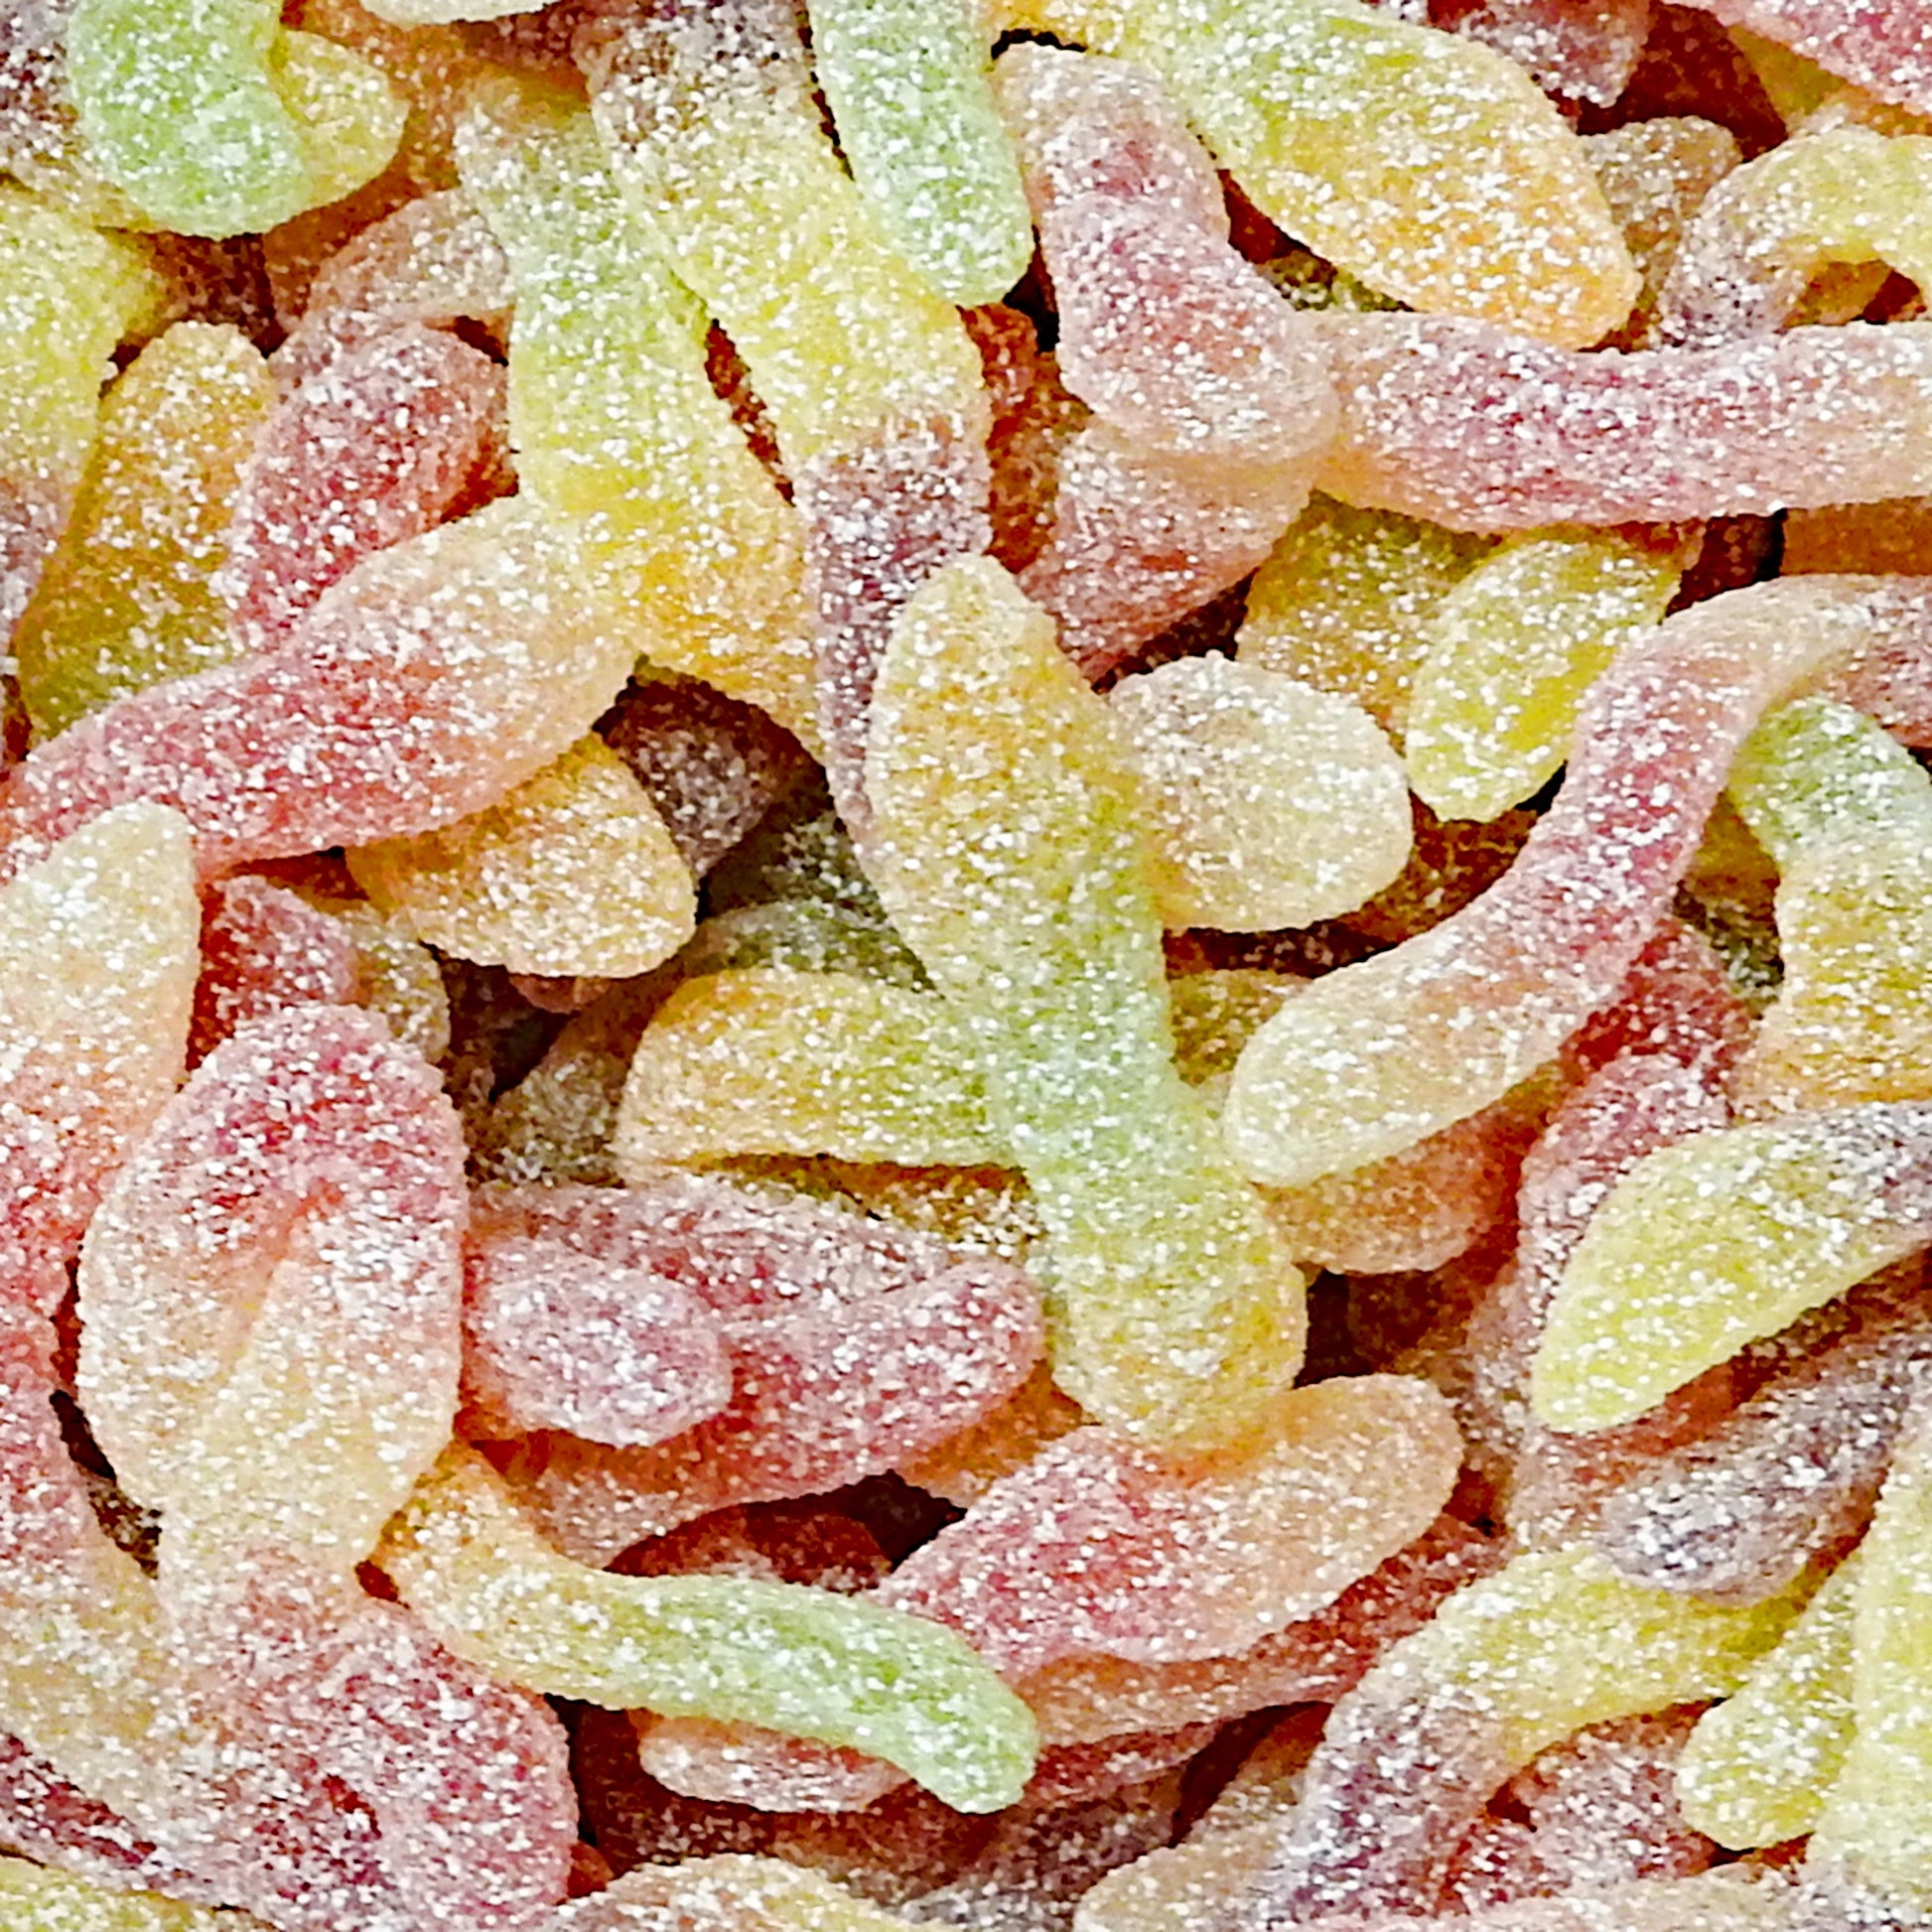 Fizzy Jelly Snakes - Retro Sweets at The Sweetie Jar